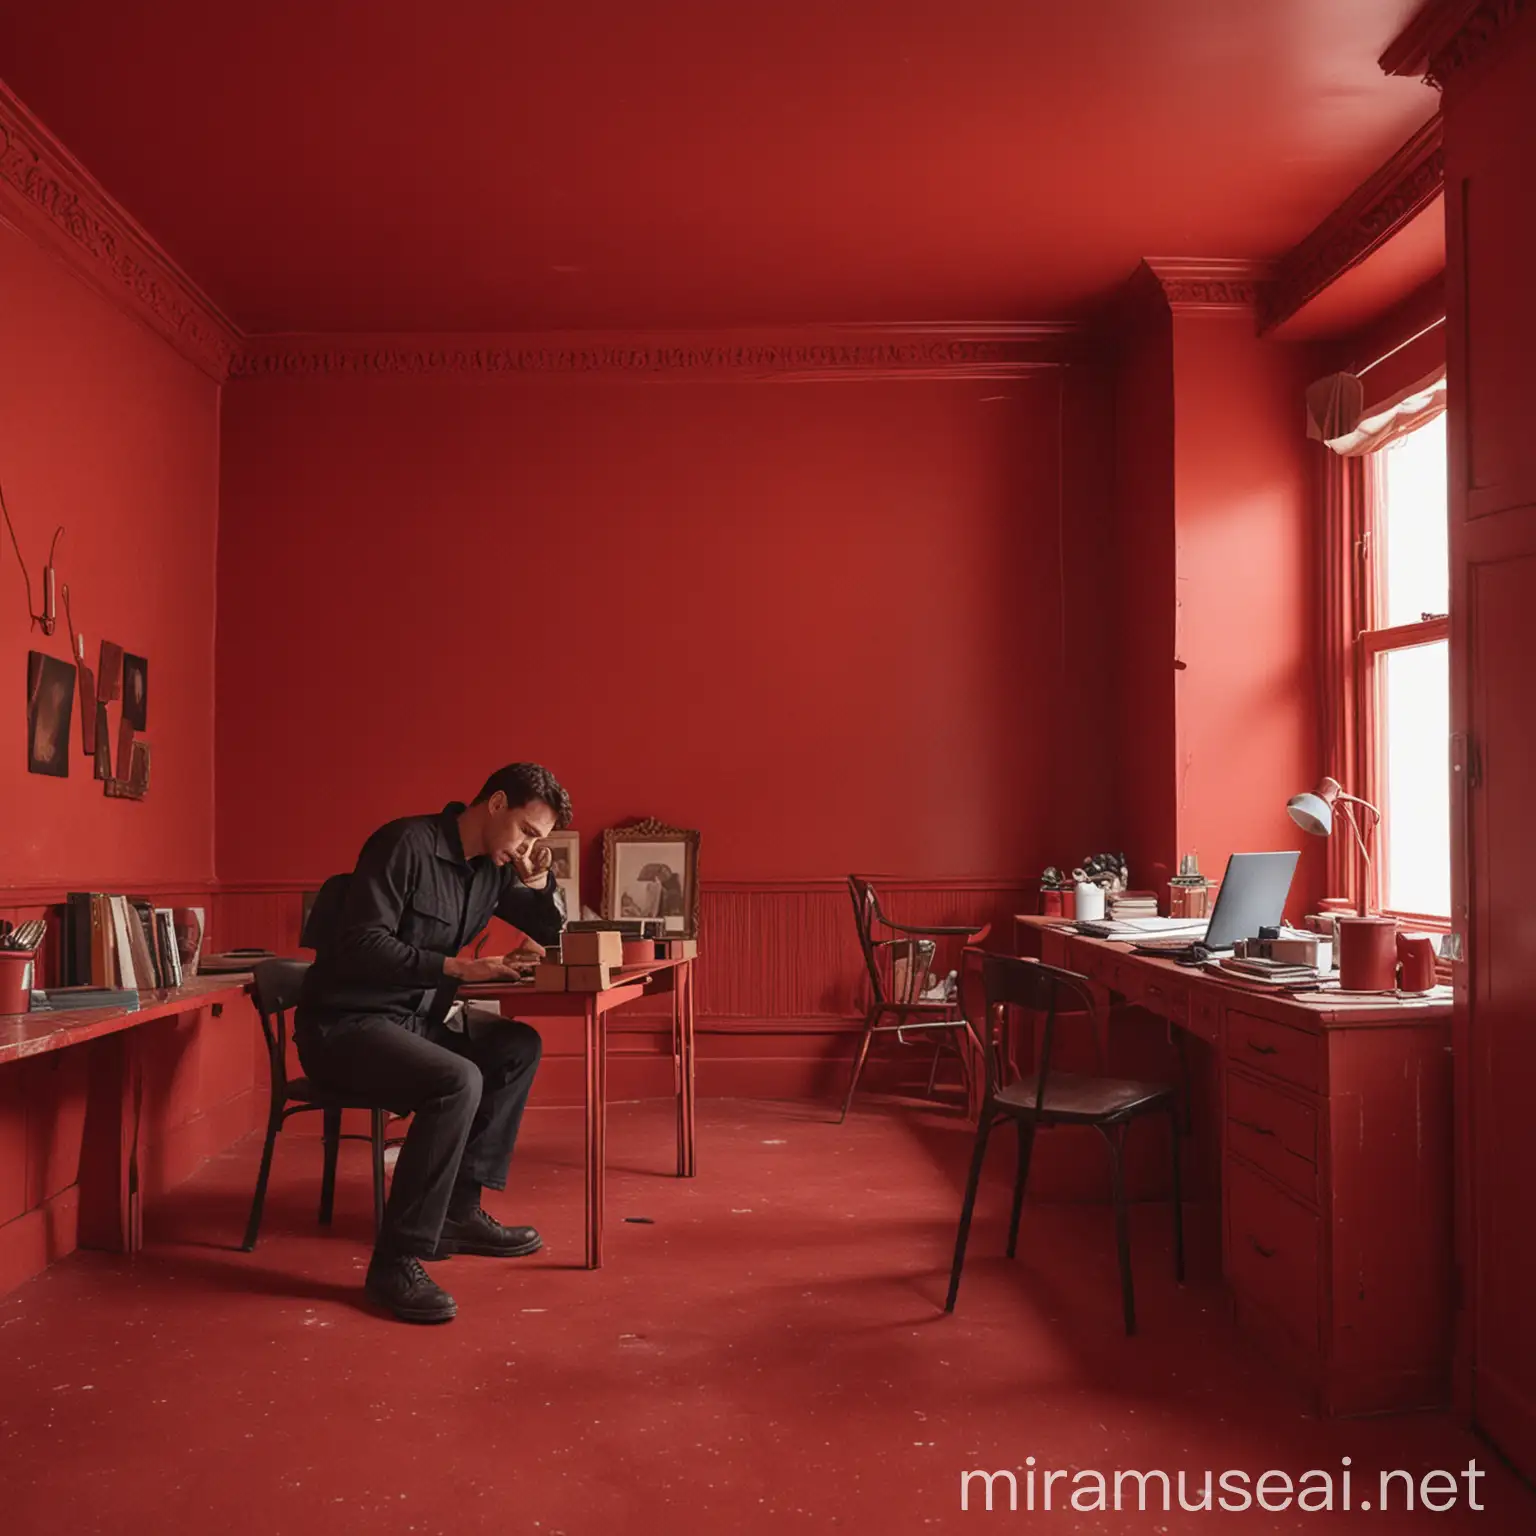 a man working in a company in a red room